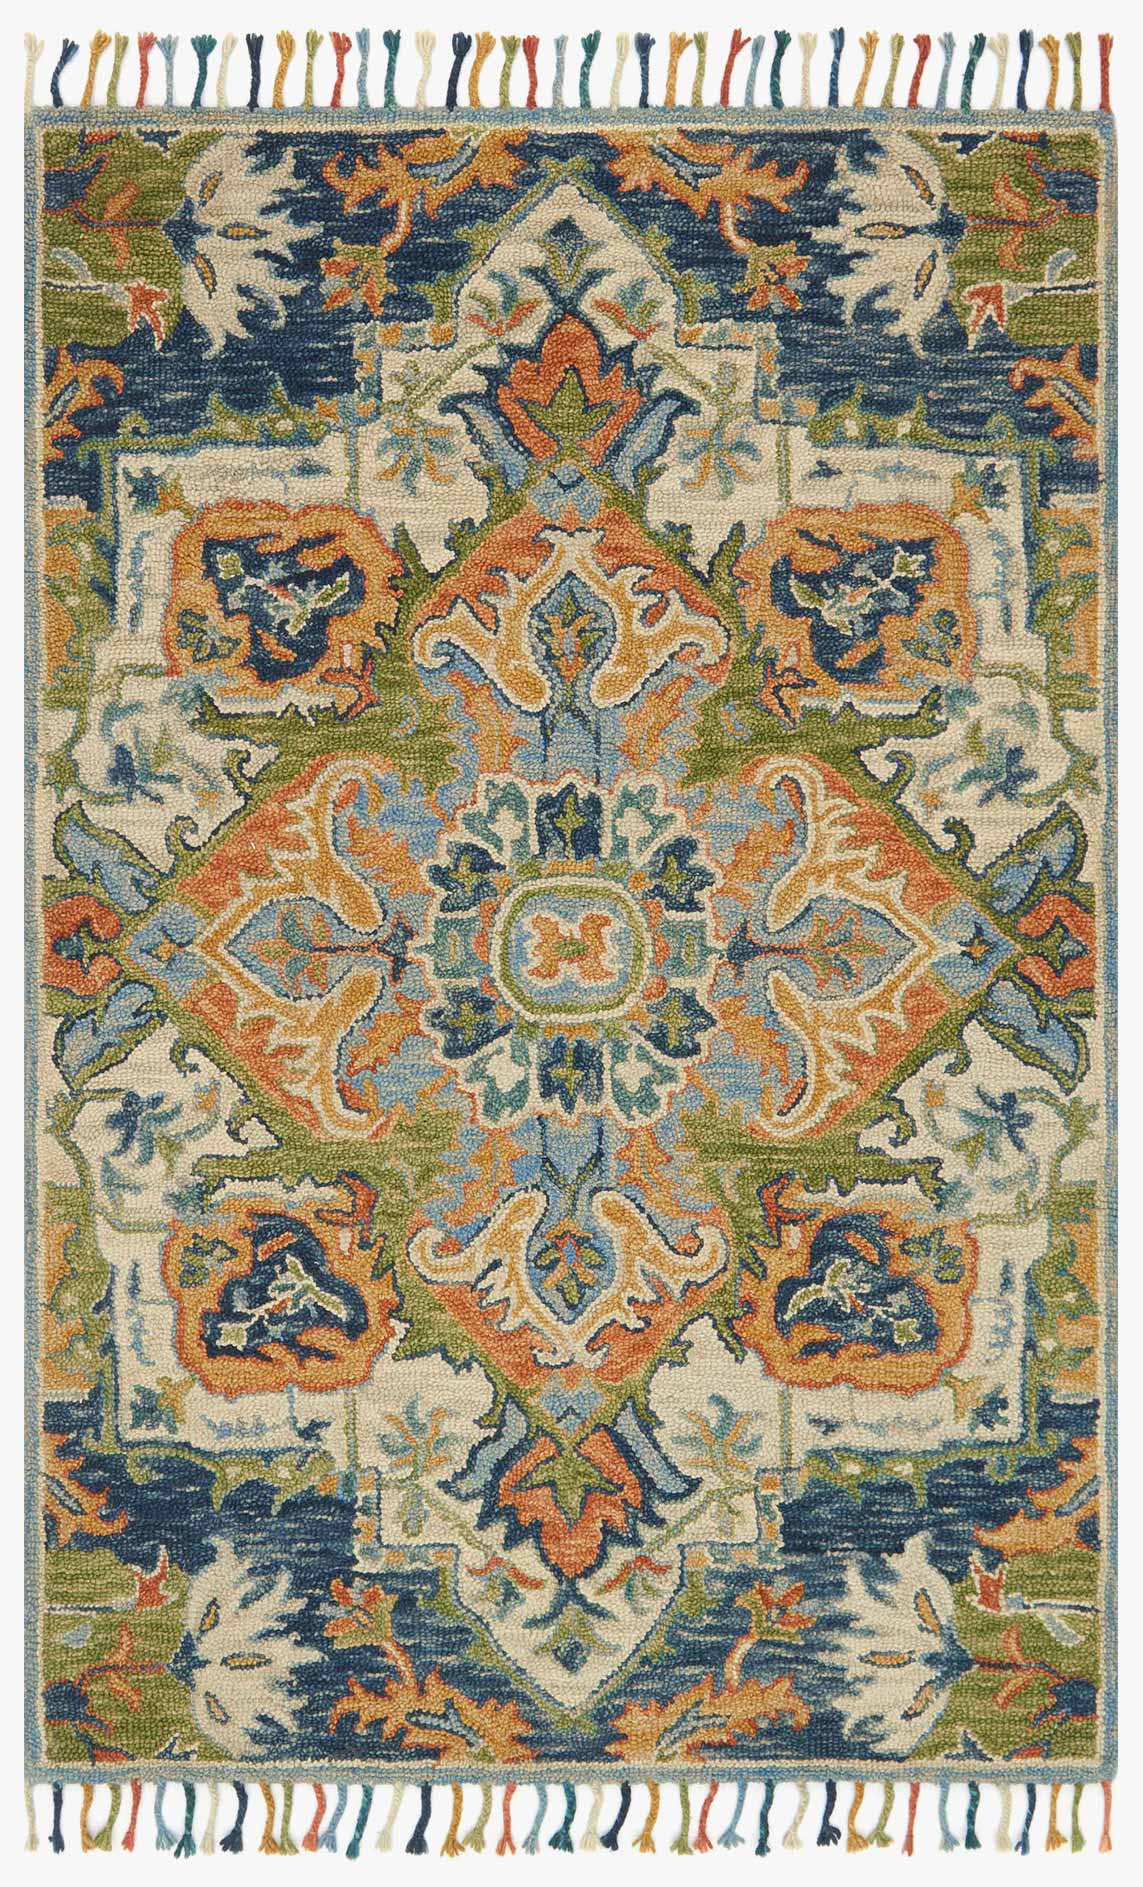 ZR-301: Wool rug - hand knotted